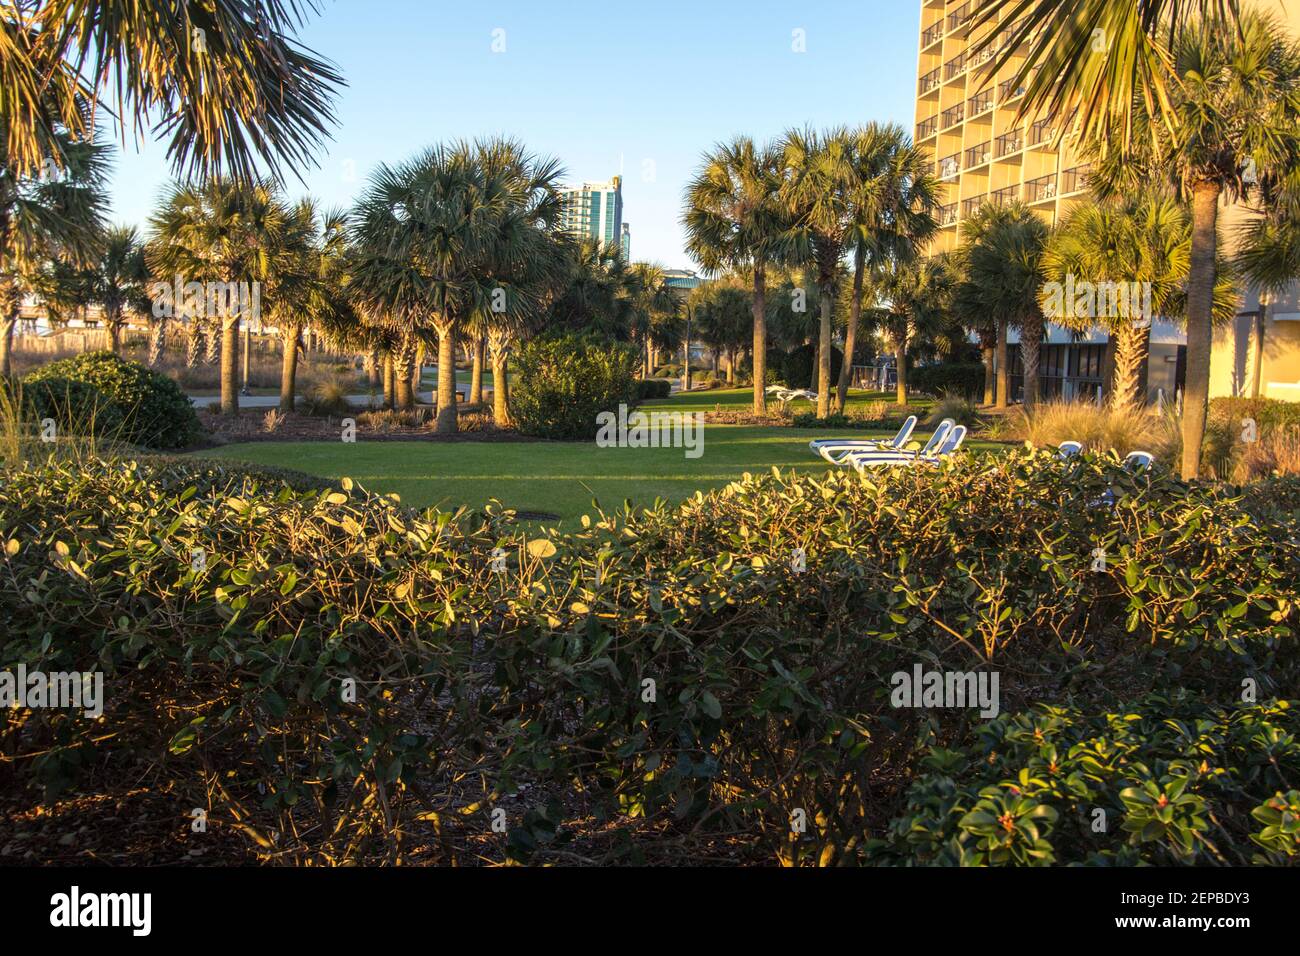 Tanning lawn with chaise lounges surrounded by palmetto and palm tress on the coast of the Atlantic Ocean in Myrtle Beach, South Carolina. Stock Photo